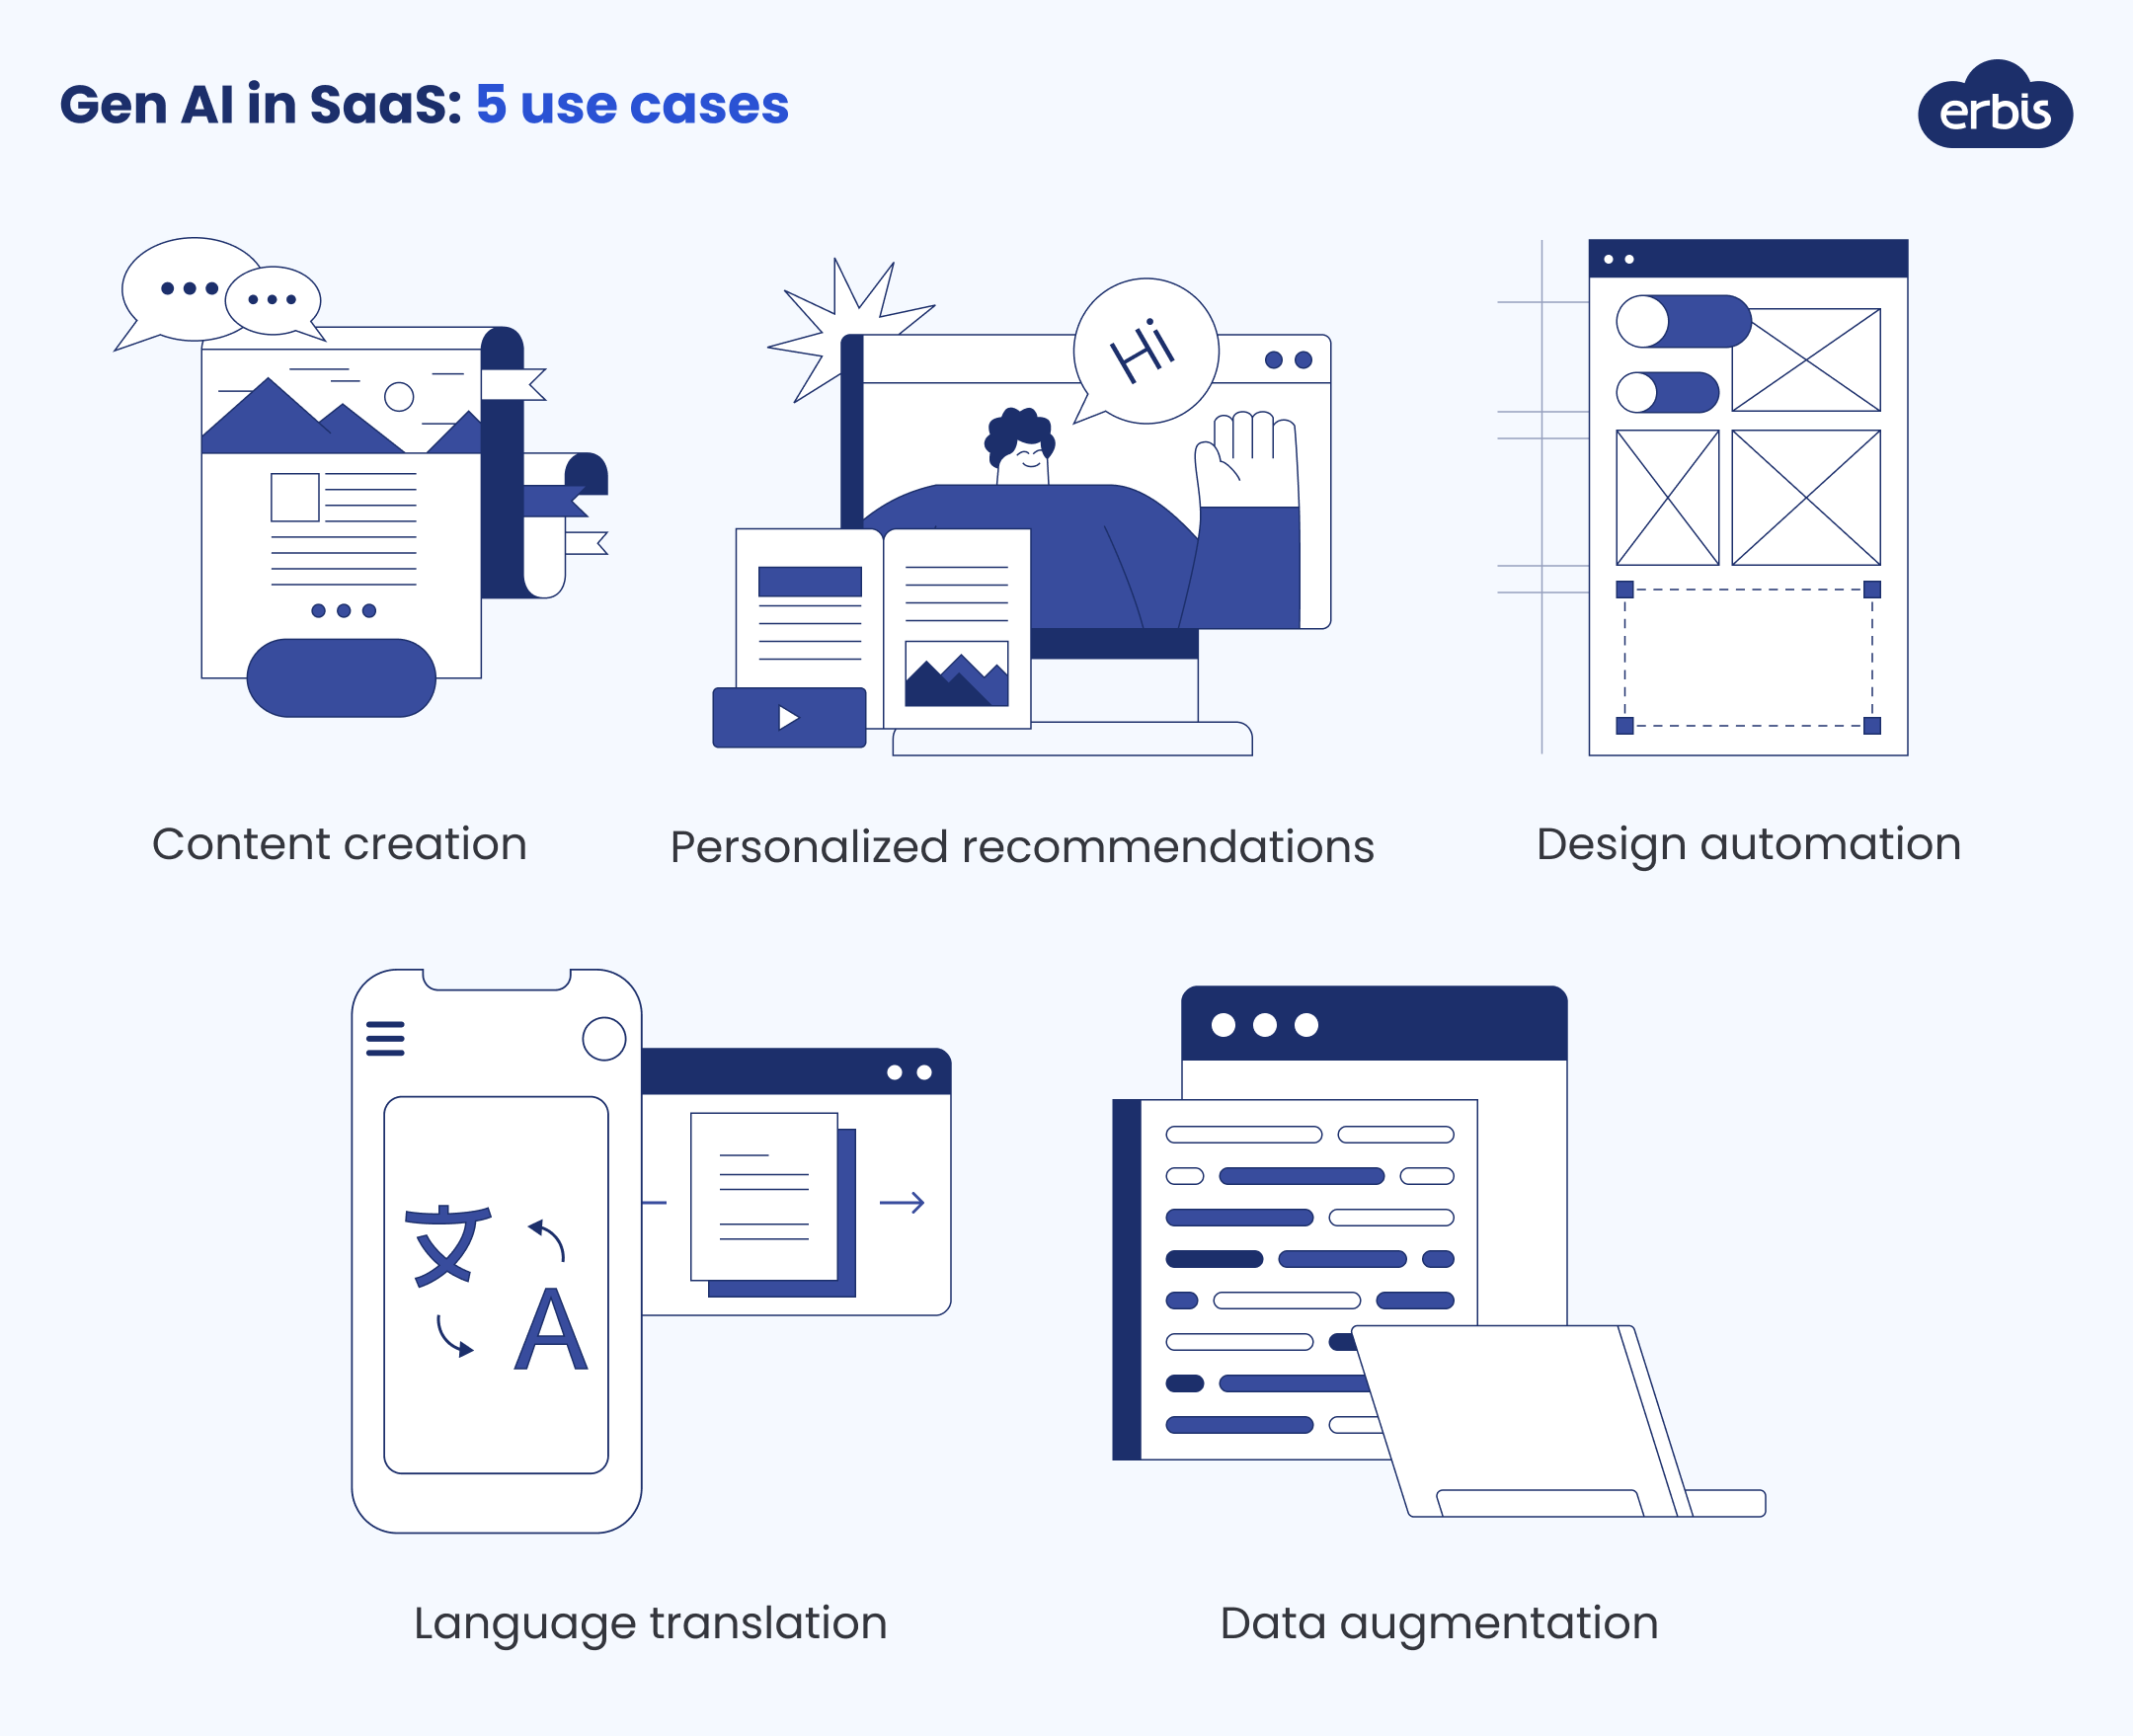 How to use gen AI in SaaS